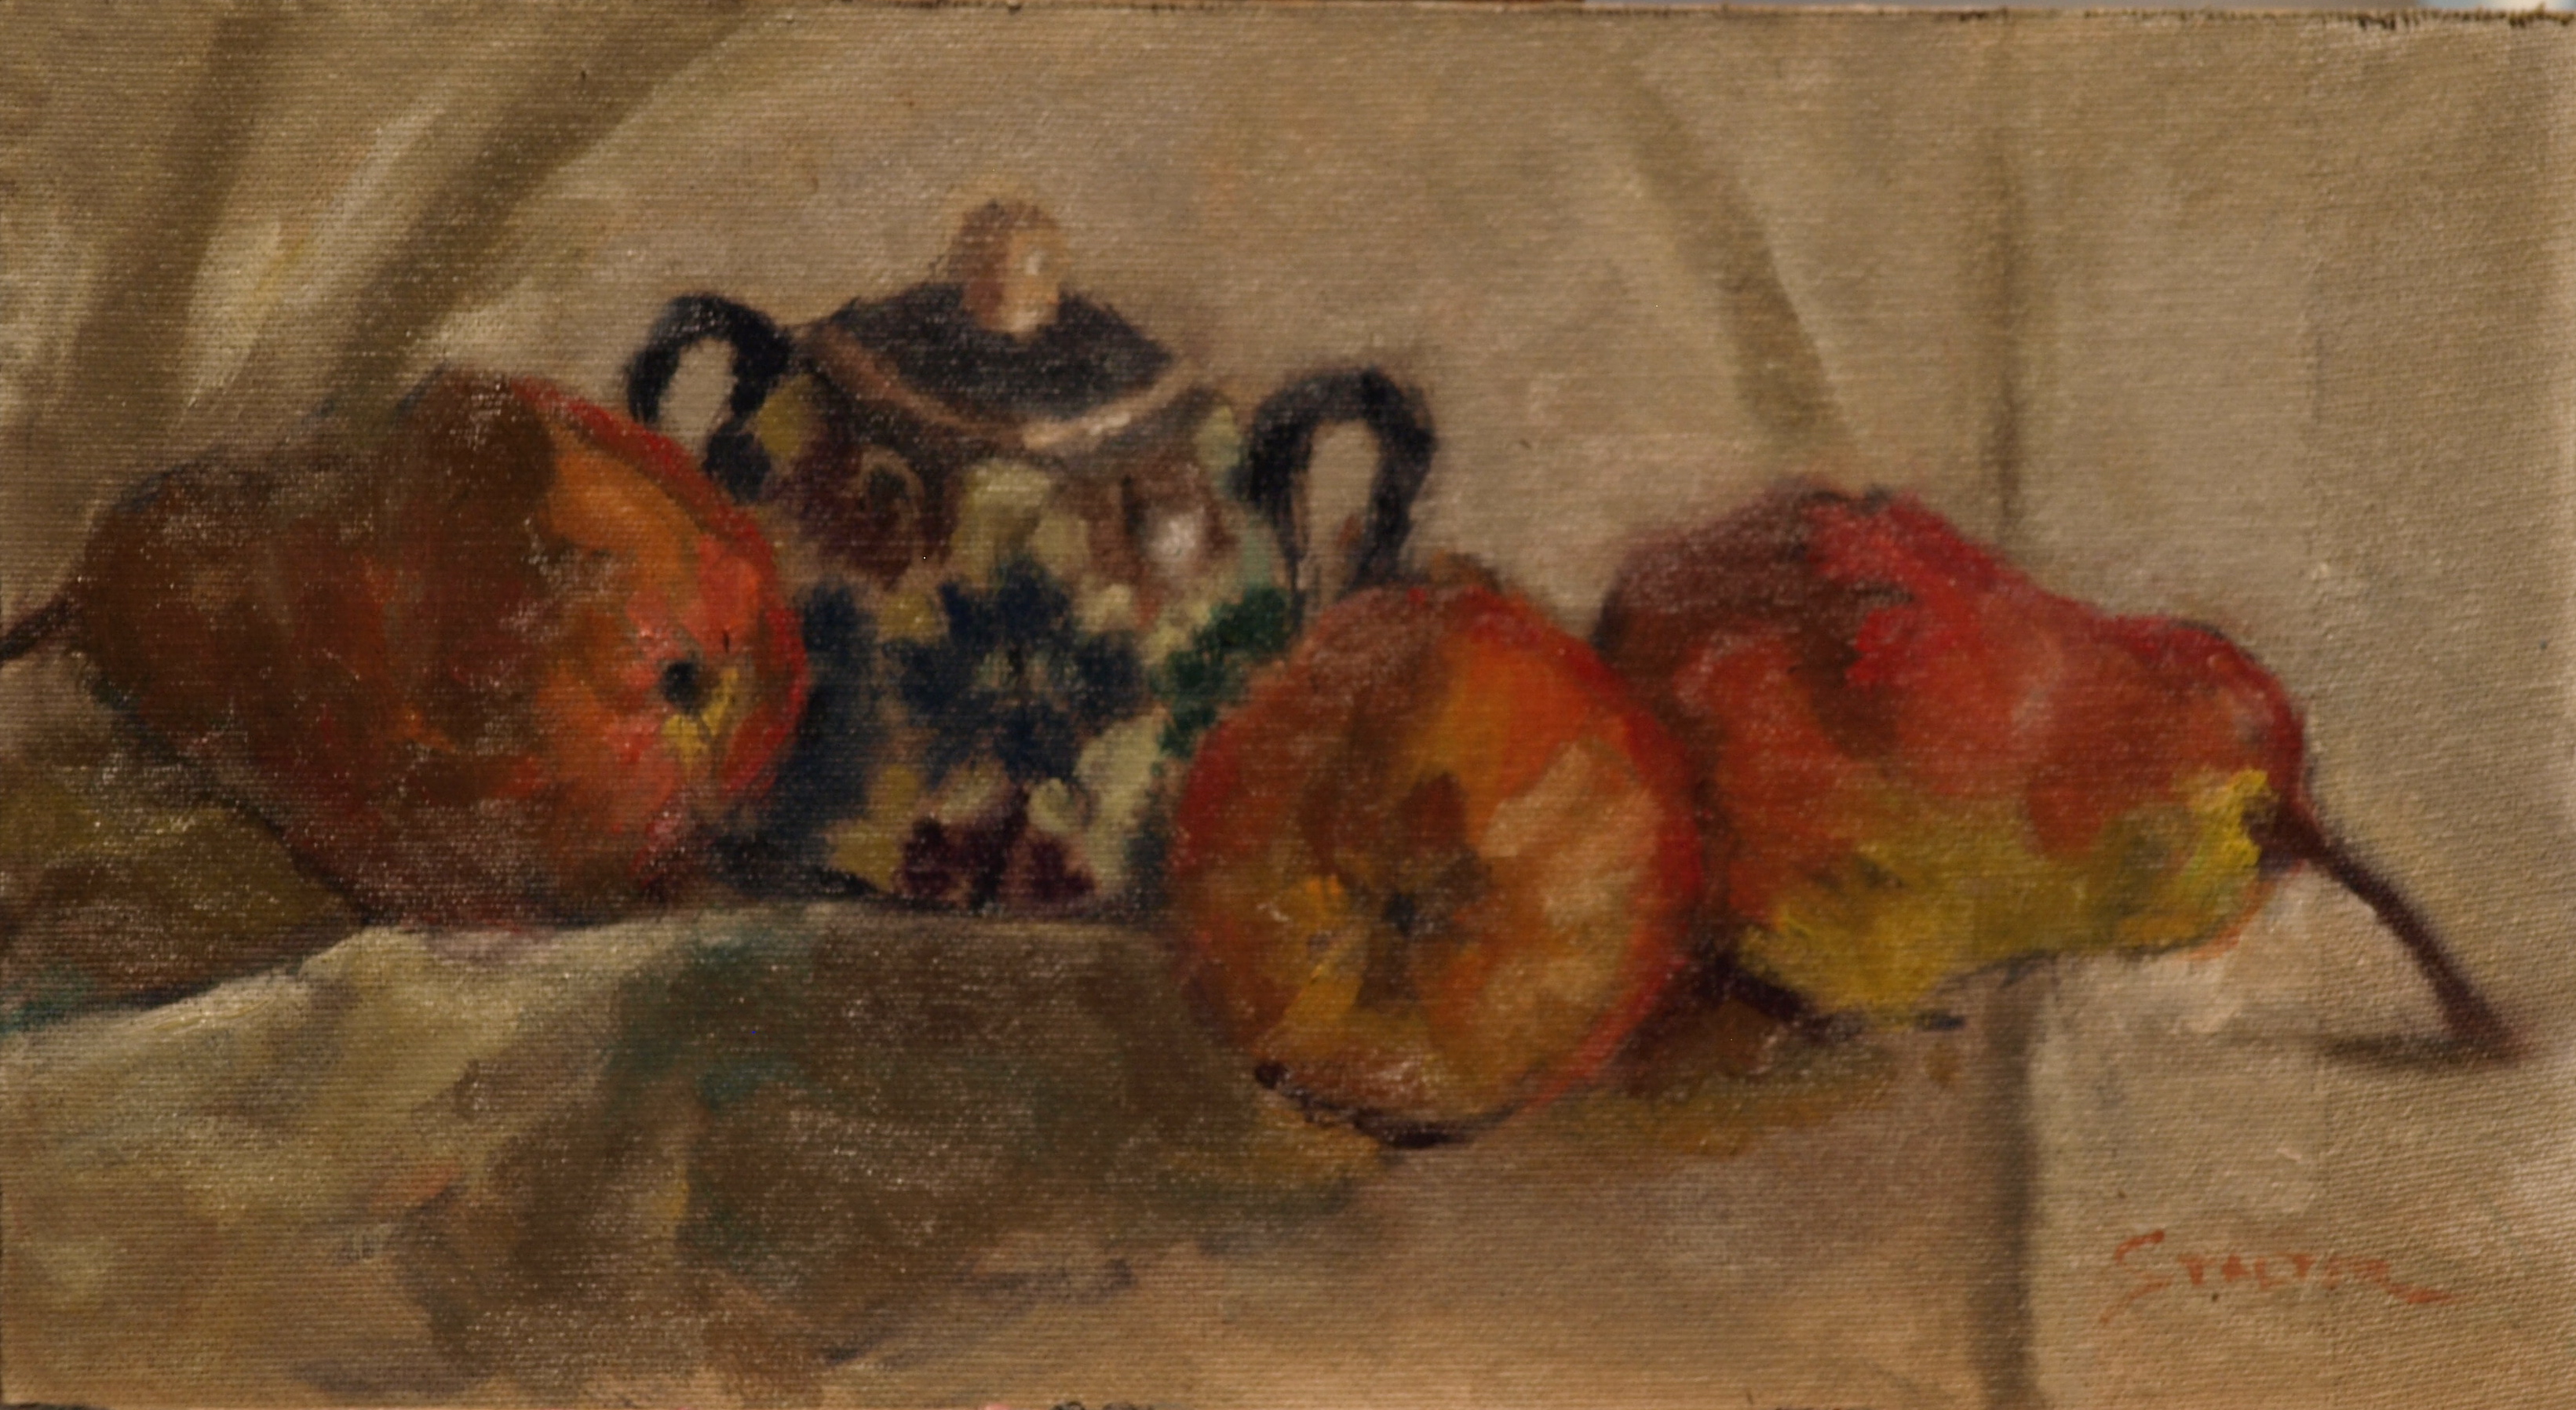 Pears and Sugar Bowl, Oil on Canvas on Panel, 8 x 14 Inches, by Richard Stalter, $225